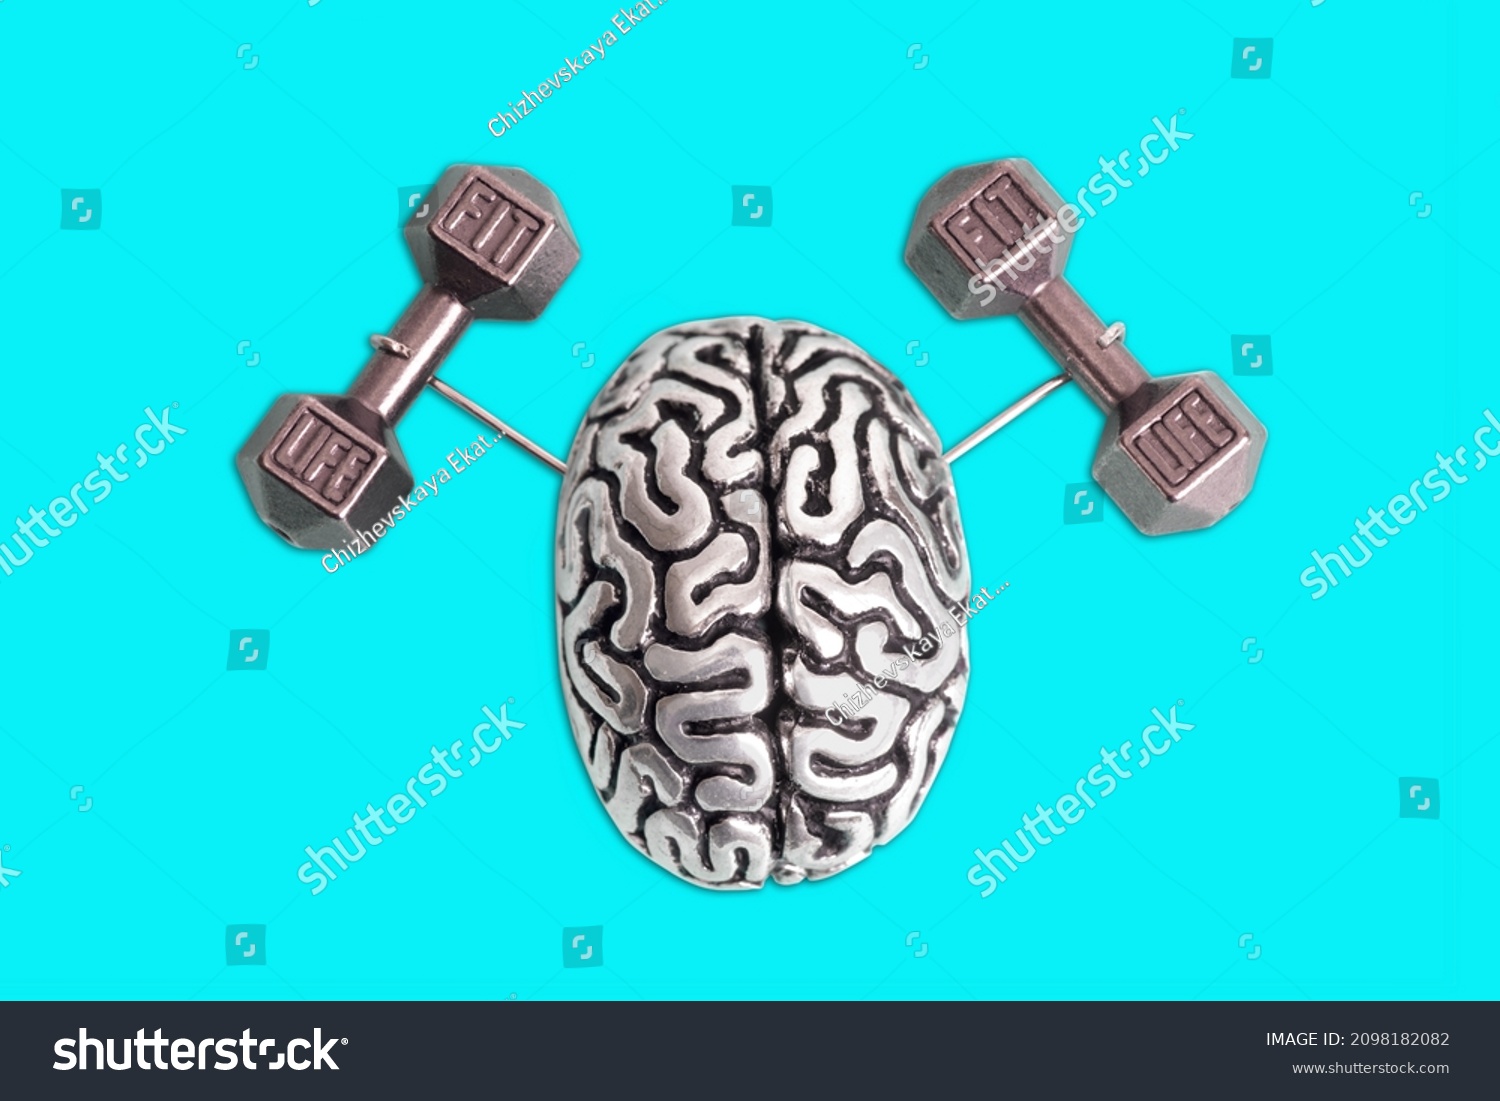 Human brain figurine with hands lifting heavy dumbbells isolated on blue. Creative fit life concept. Boosting intellectual power through brain training. #2098182082